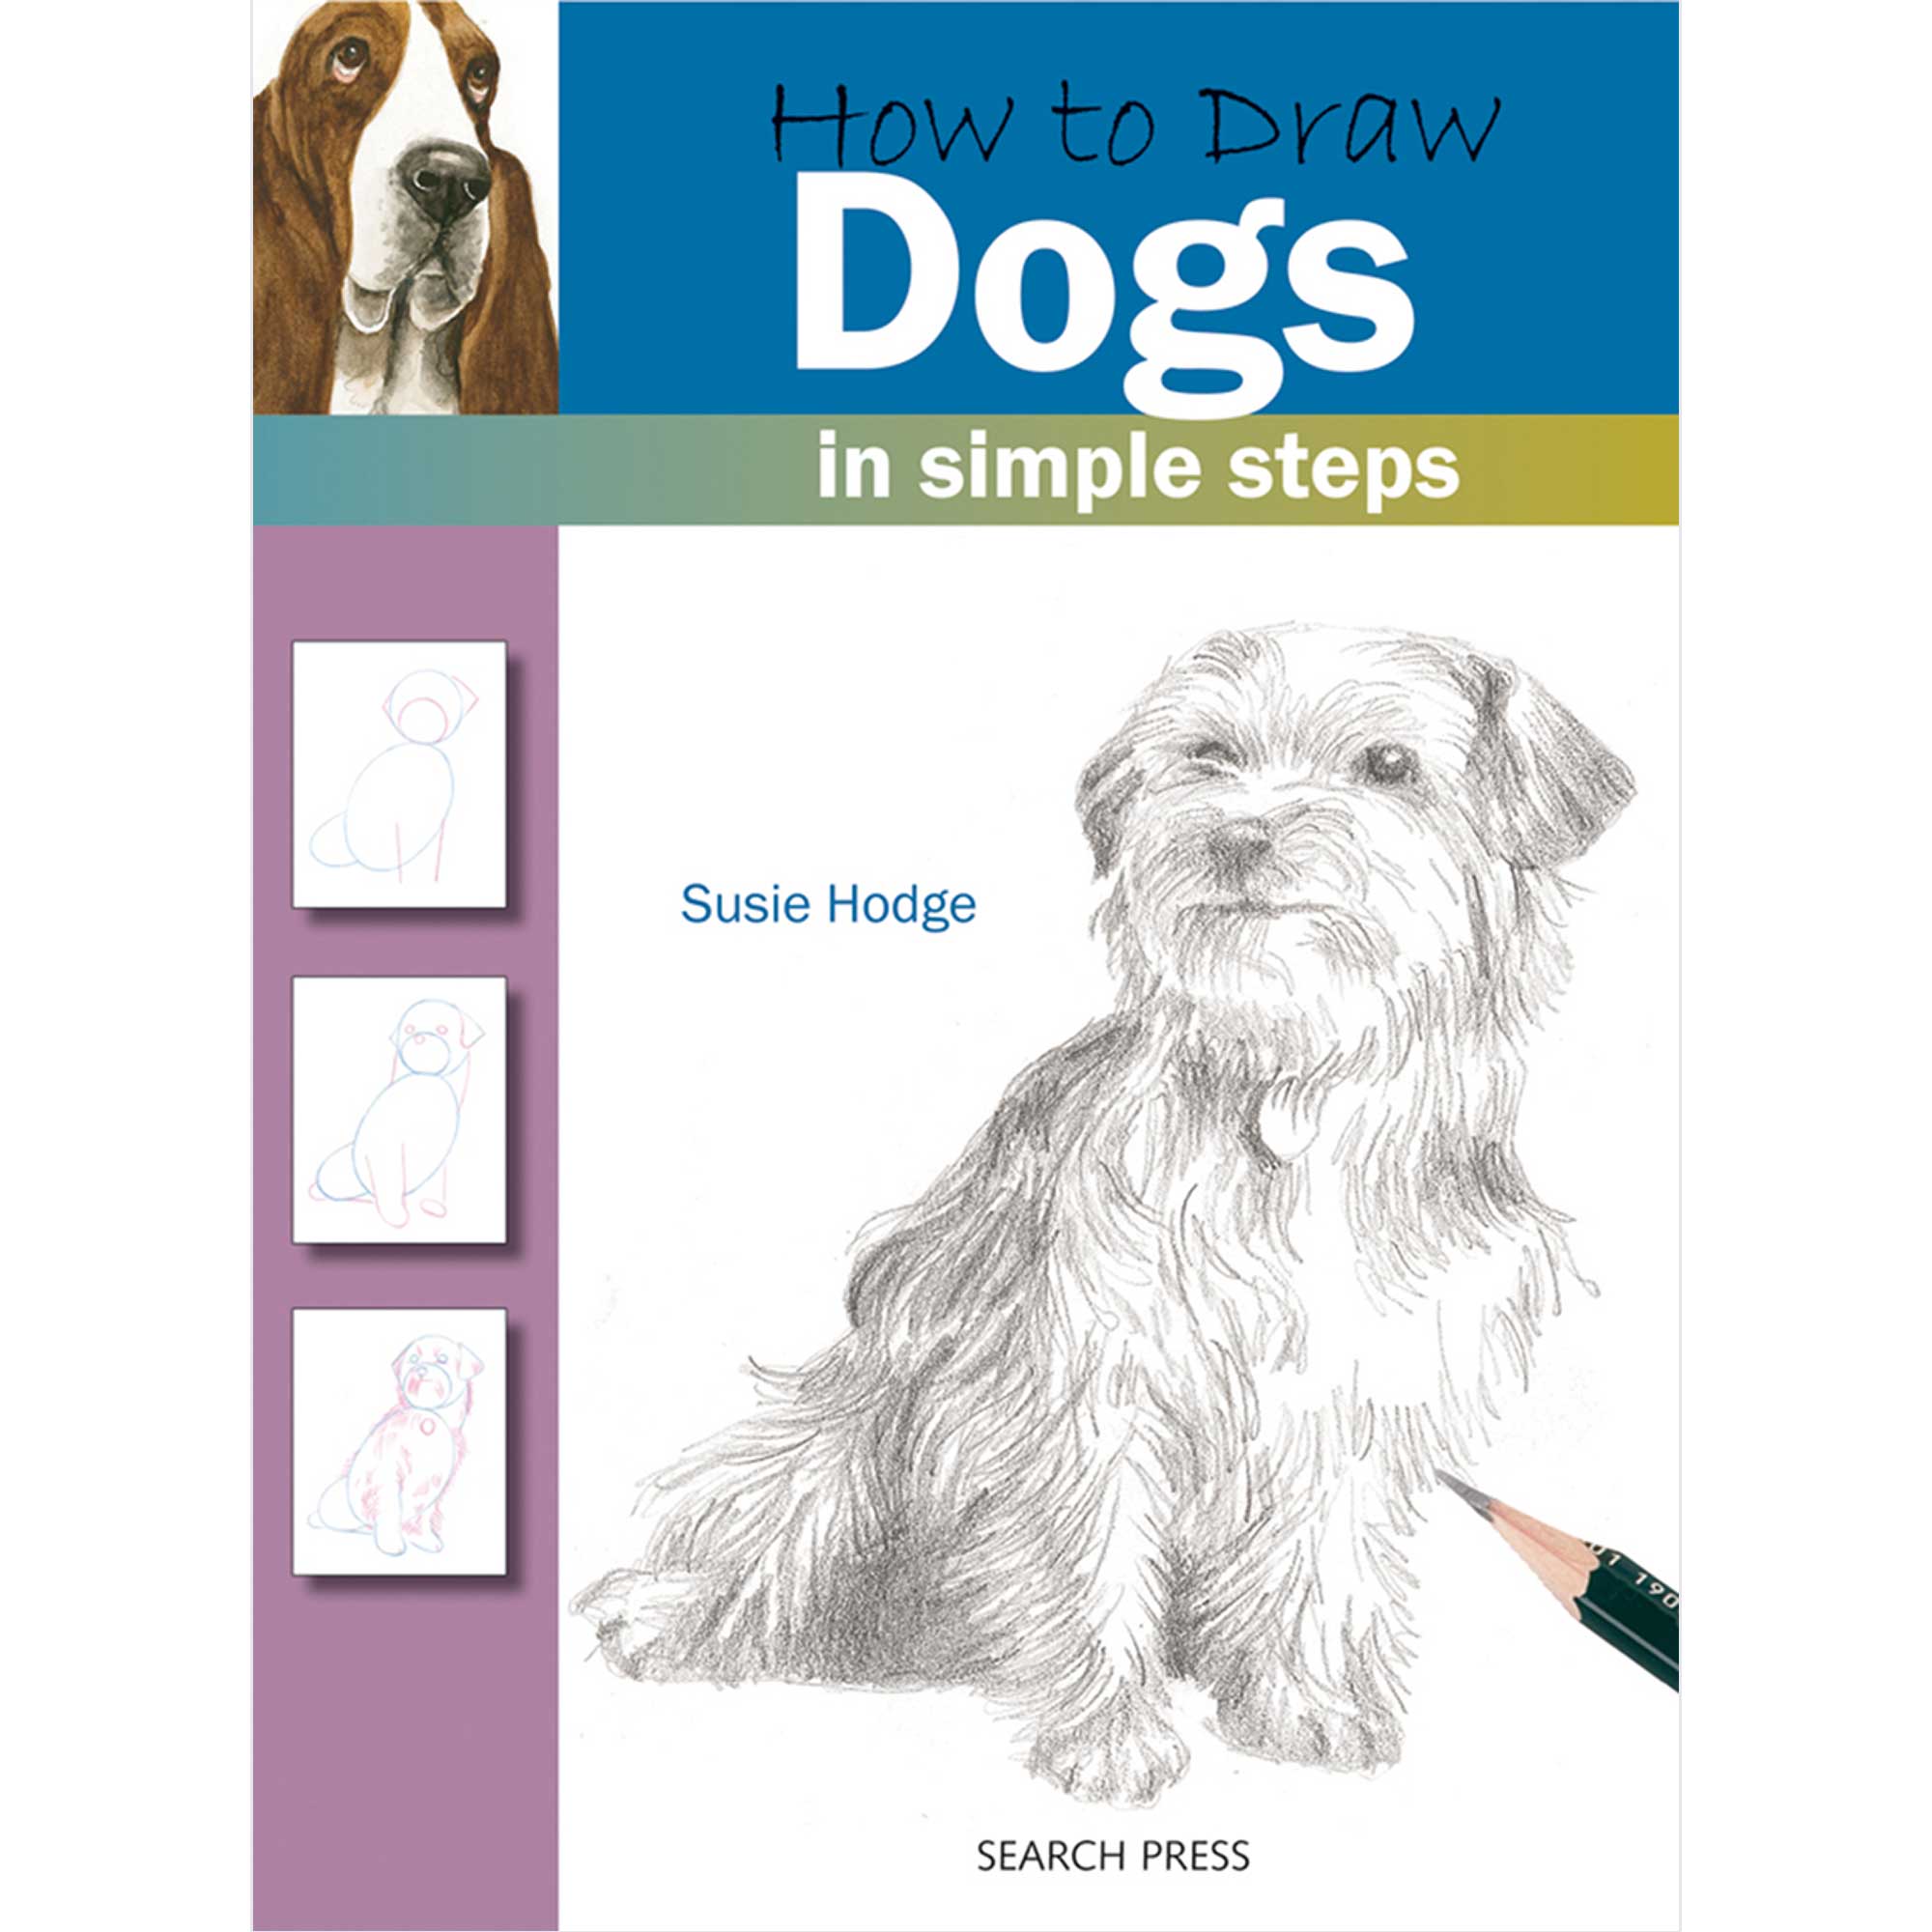 How to Draw Dogs in Simple Steps - S. Hodges